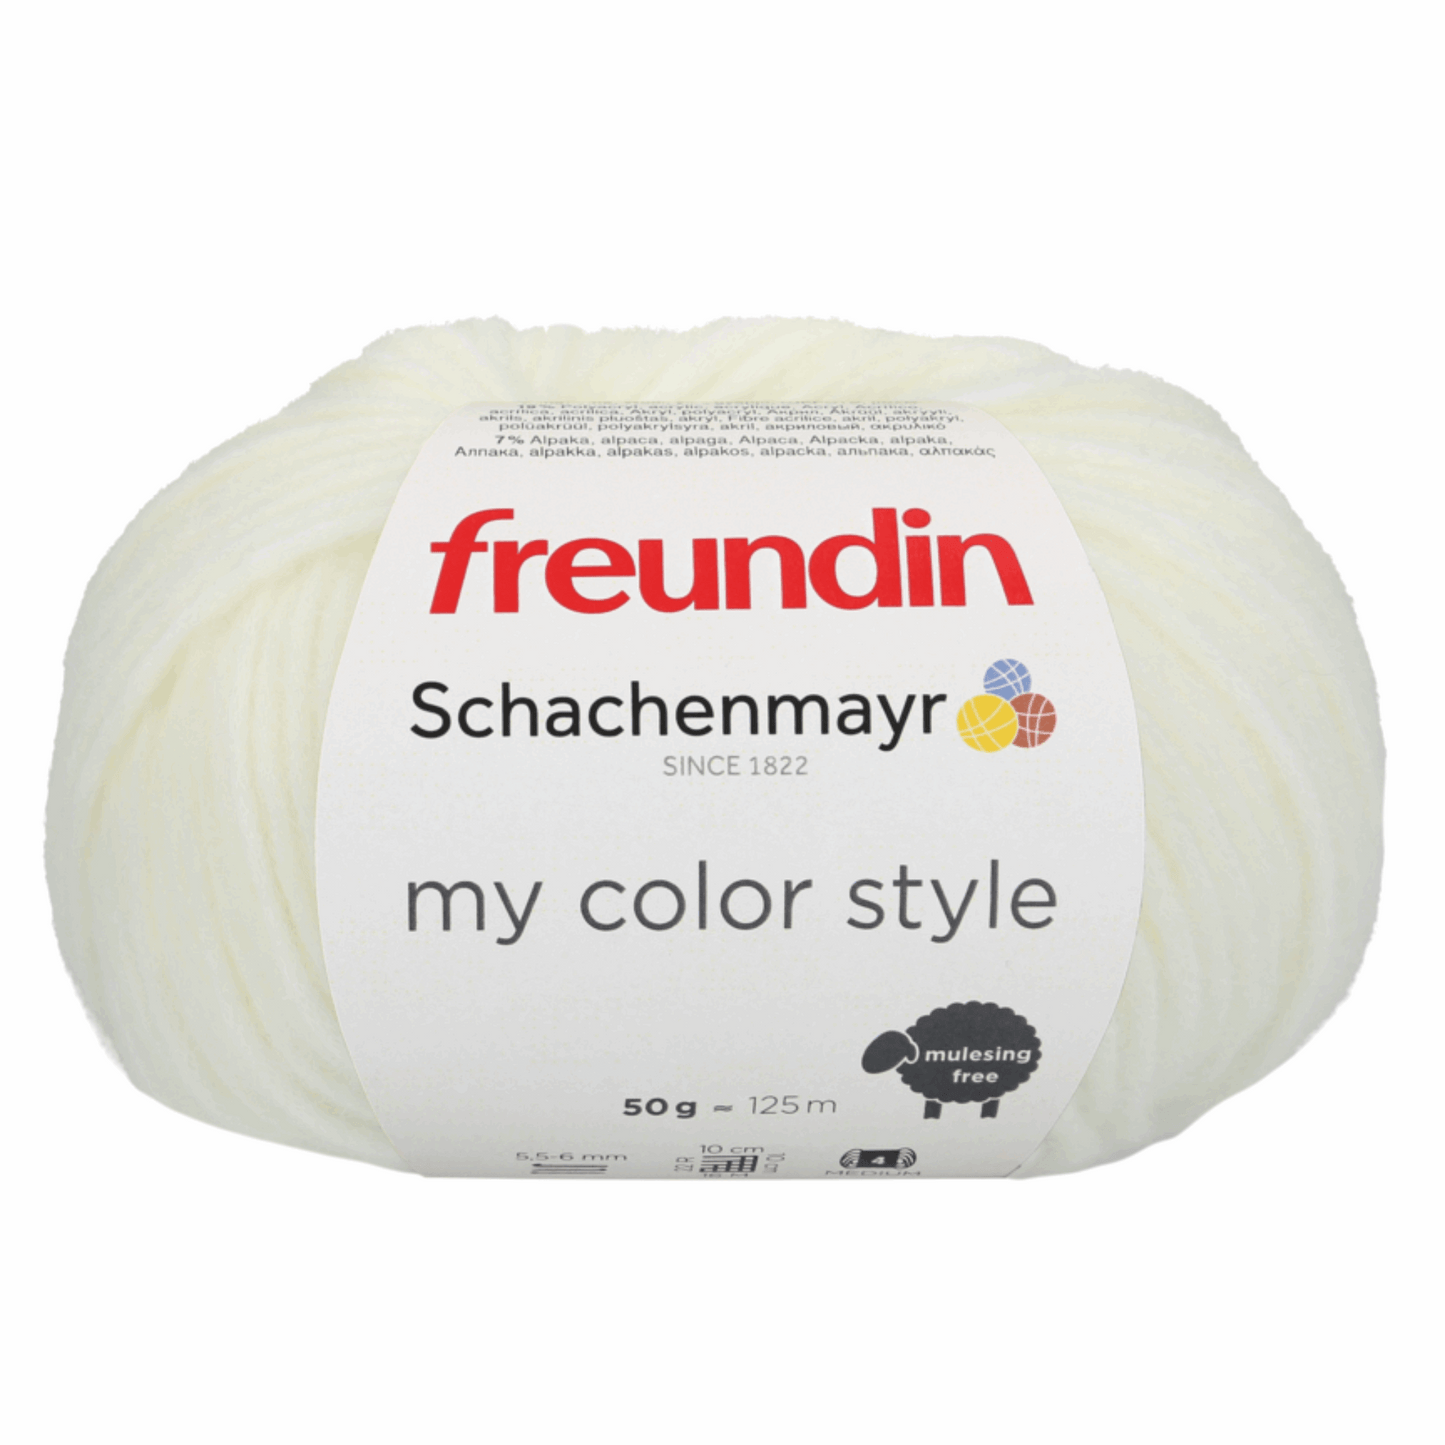 Schachenmayr My Color Style 50g, 97117, Farbe creme melang 2